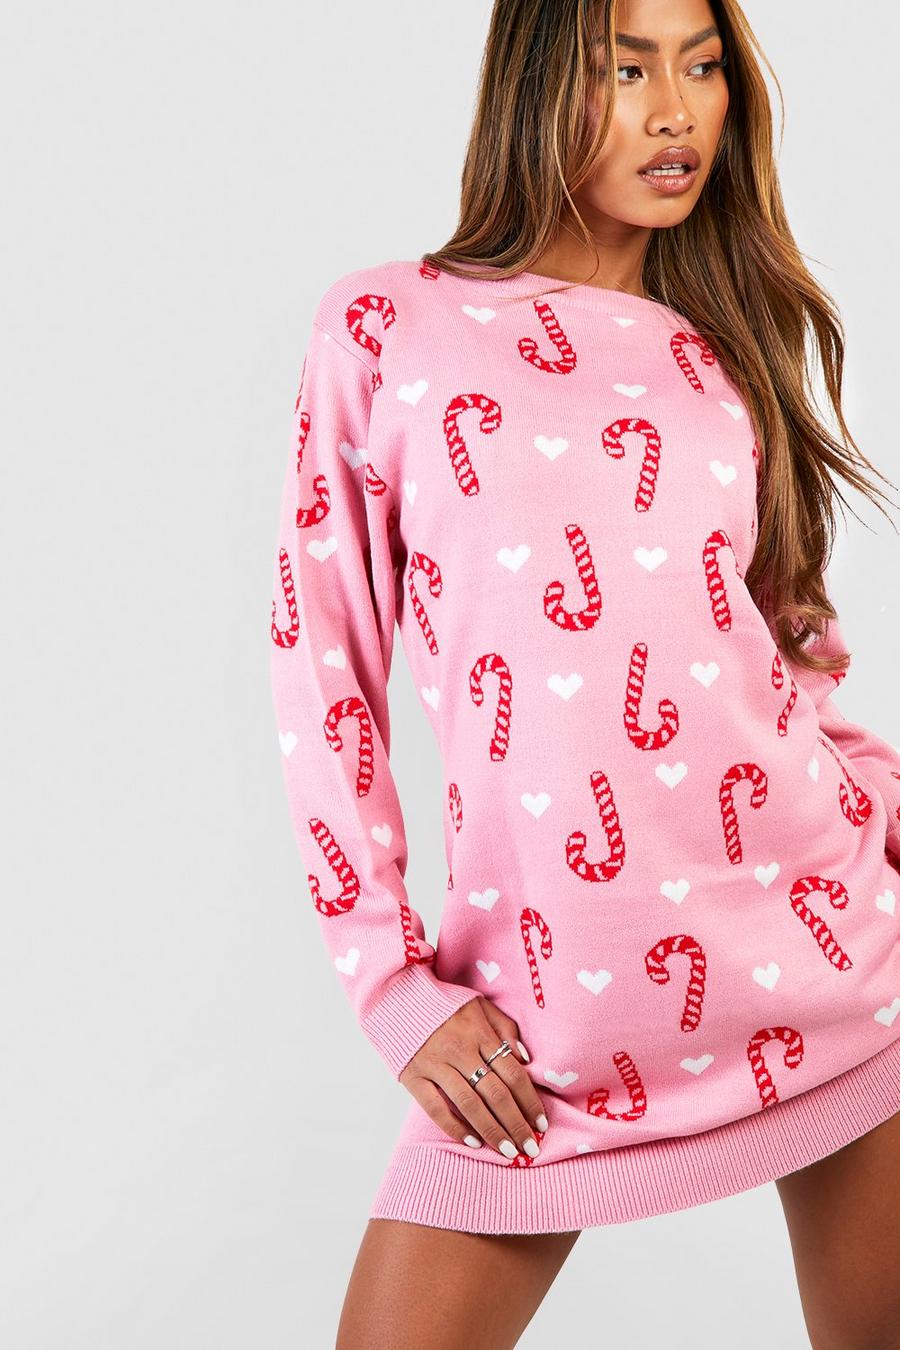 Baby pink All Over Candy Cane Christmas Sweater Dress